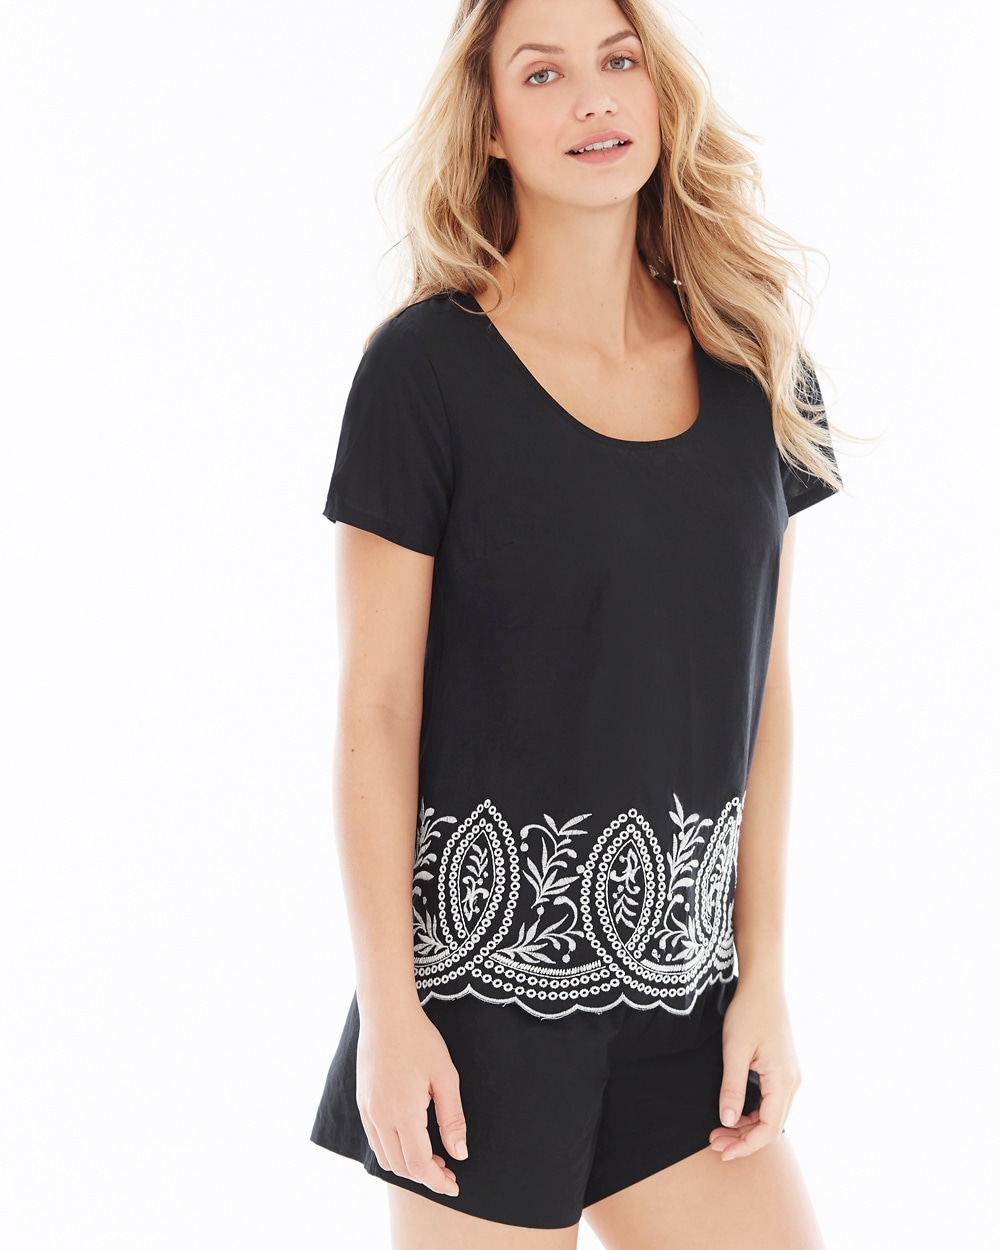 Cool Nights and Cotton Short Sleeve Pajama Top Impeccable Black Border